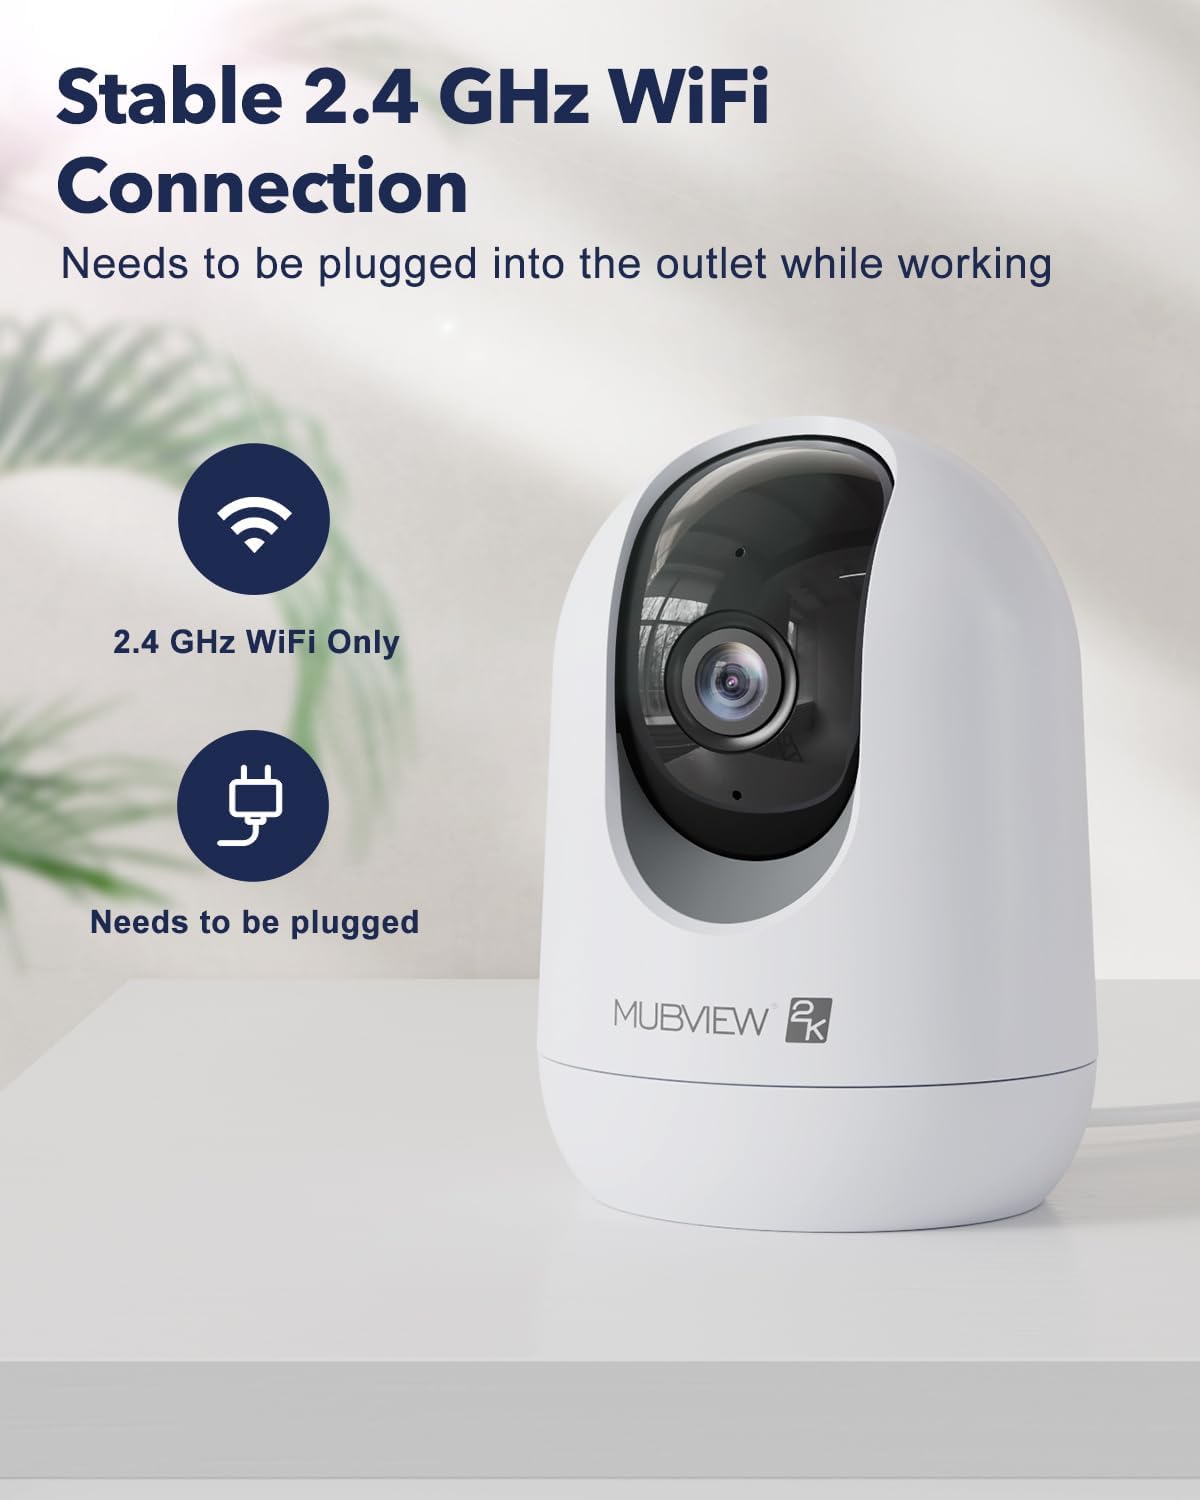 Scrutiny of Indoor Security Camera 2K, Pet Camera with Phone App, WiFi Cameras for Home Security Camera for Dog/ Baby Monitor/Elder Pan Tilt, 2.4G, 24/7